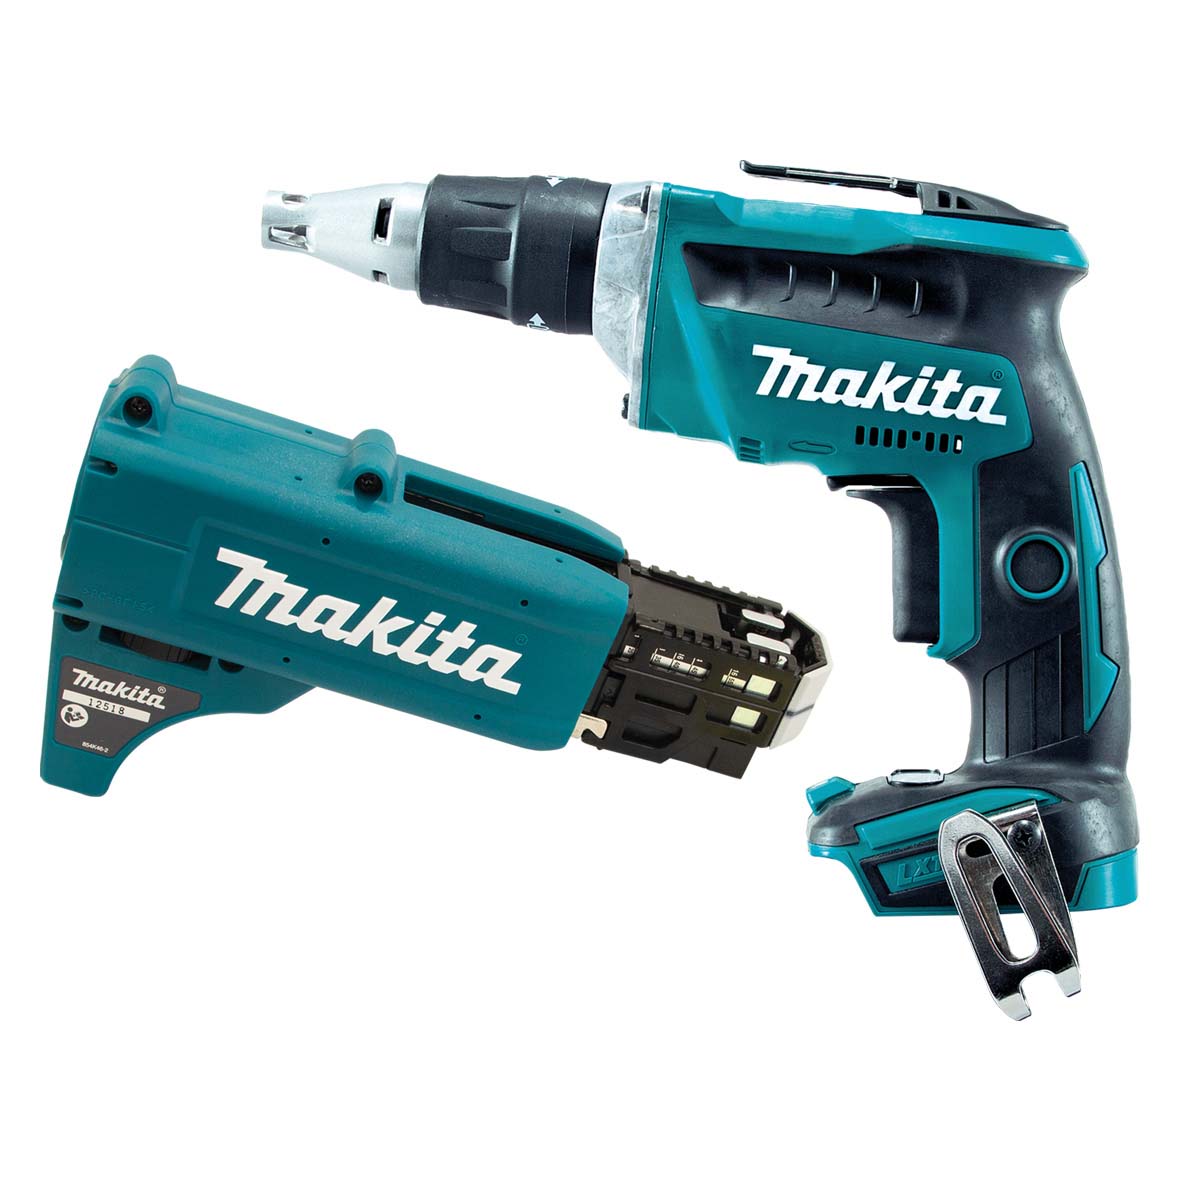 18V Brushless High Speed Screwdriver Bare (Tool Only) DFS452ZJX2 by Makita